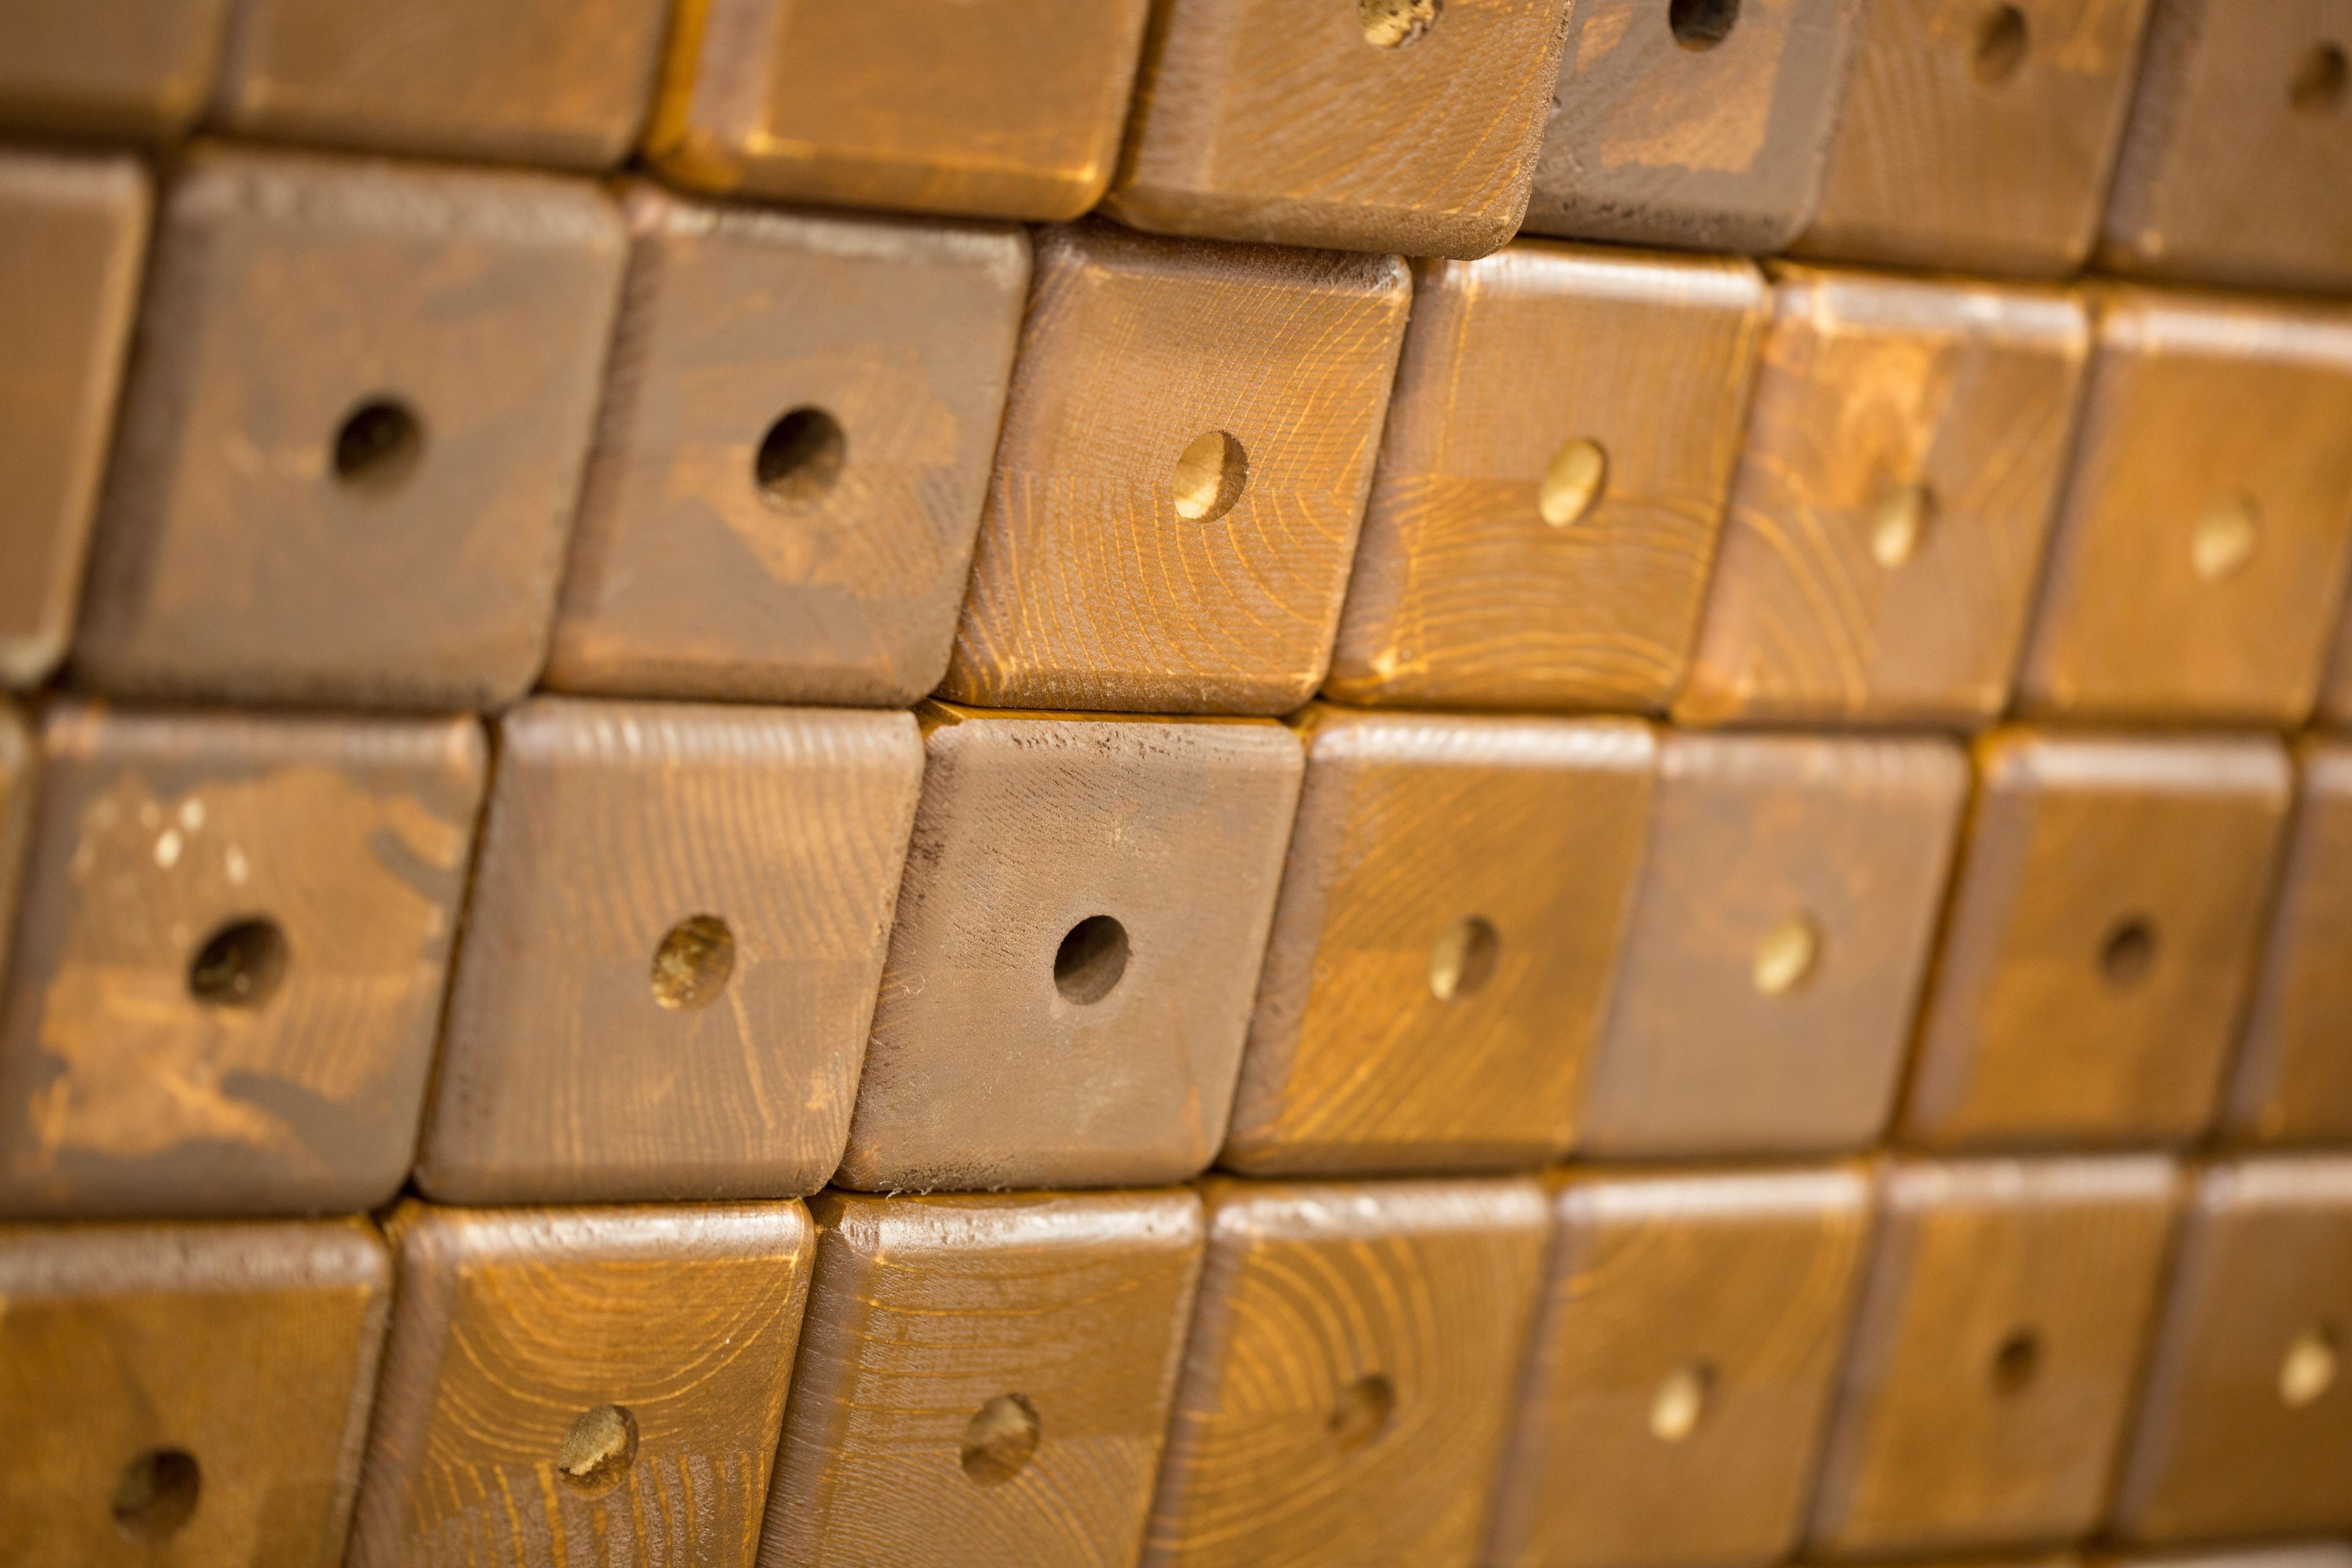 Pieces of wood with holes drilled into them, stacked close together.